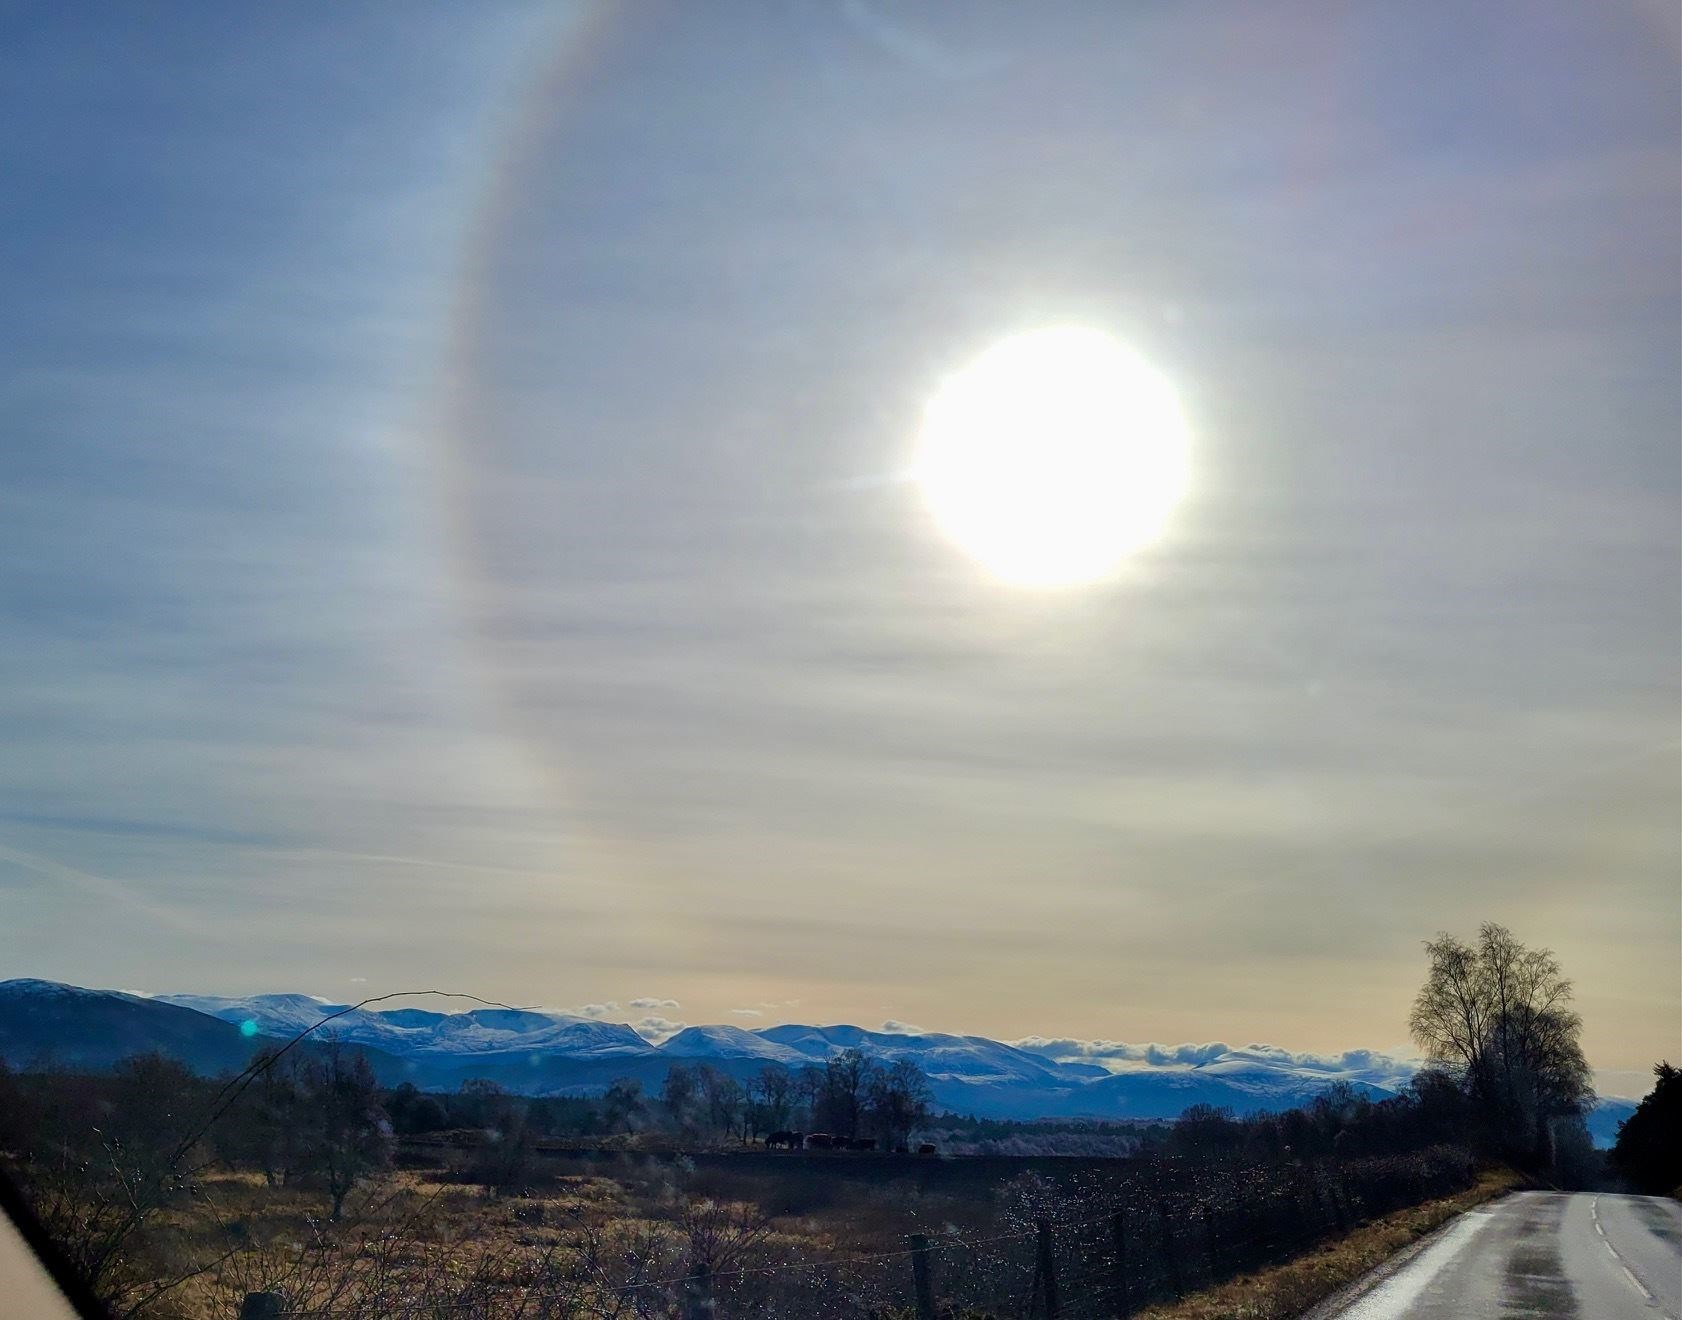 Northern Scot reader Hazel Thomson took pictures of the phenomenon over the weekend.